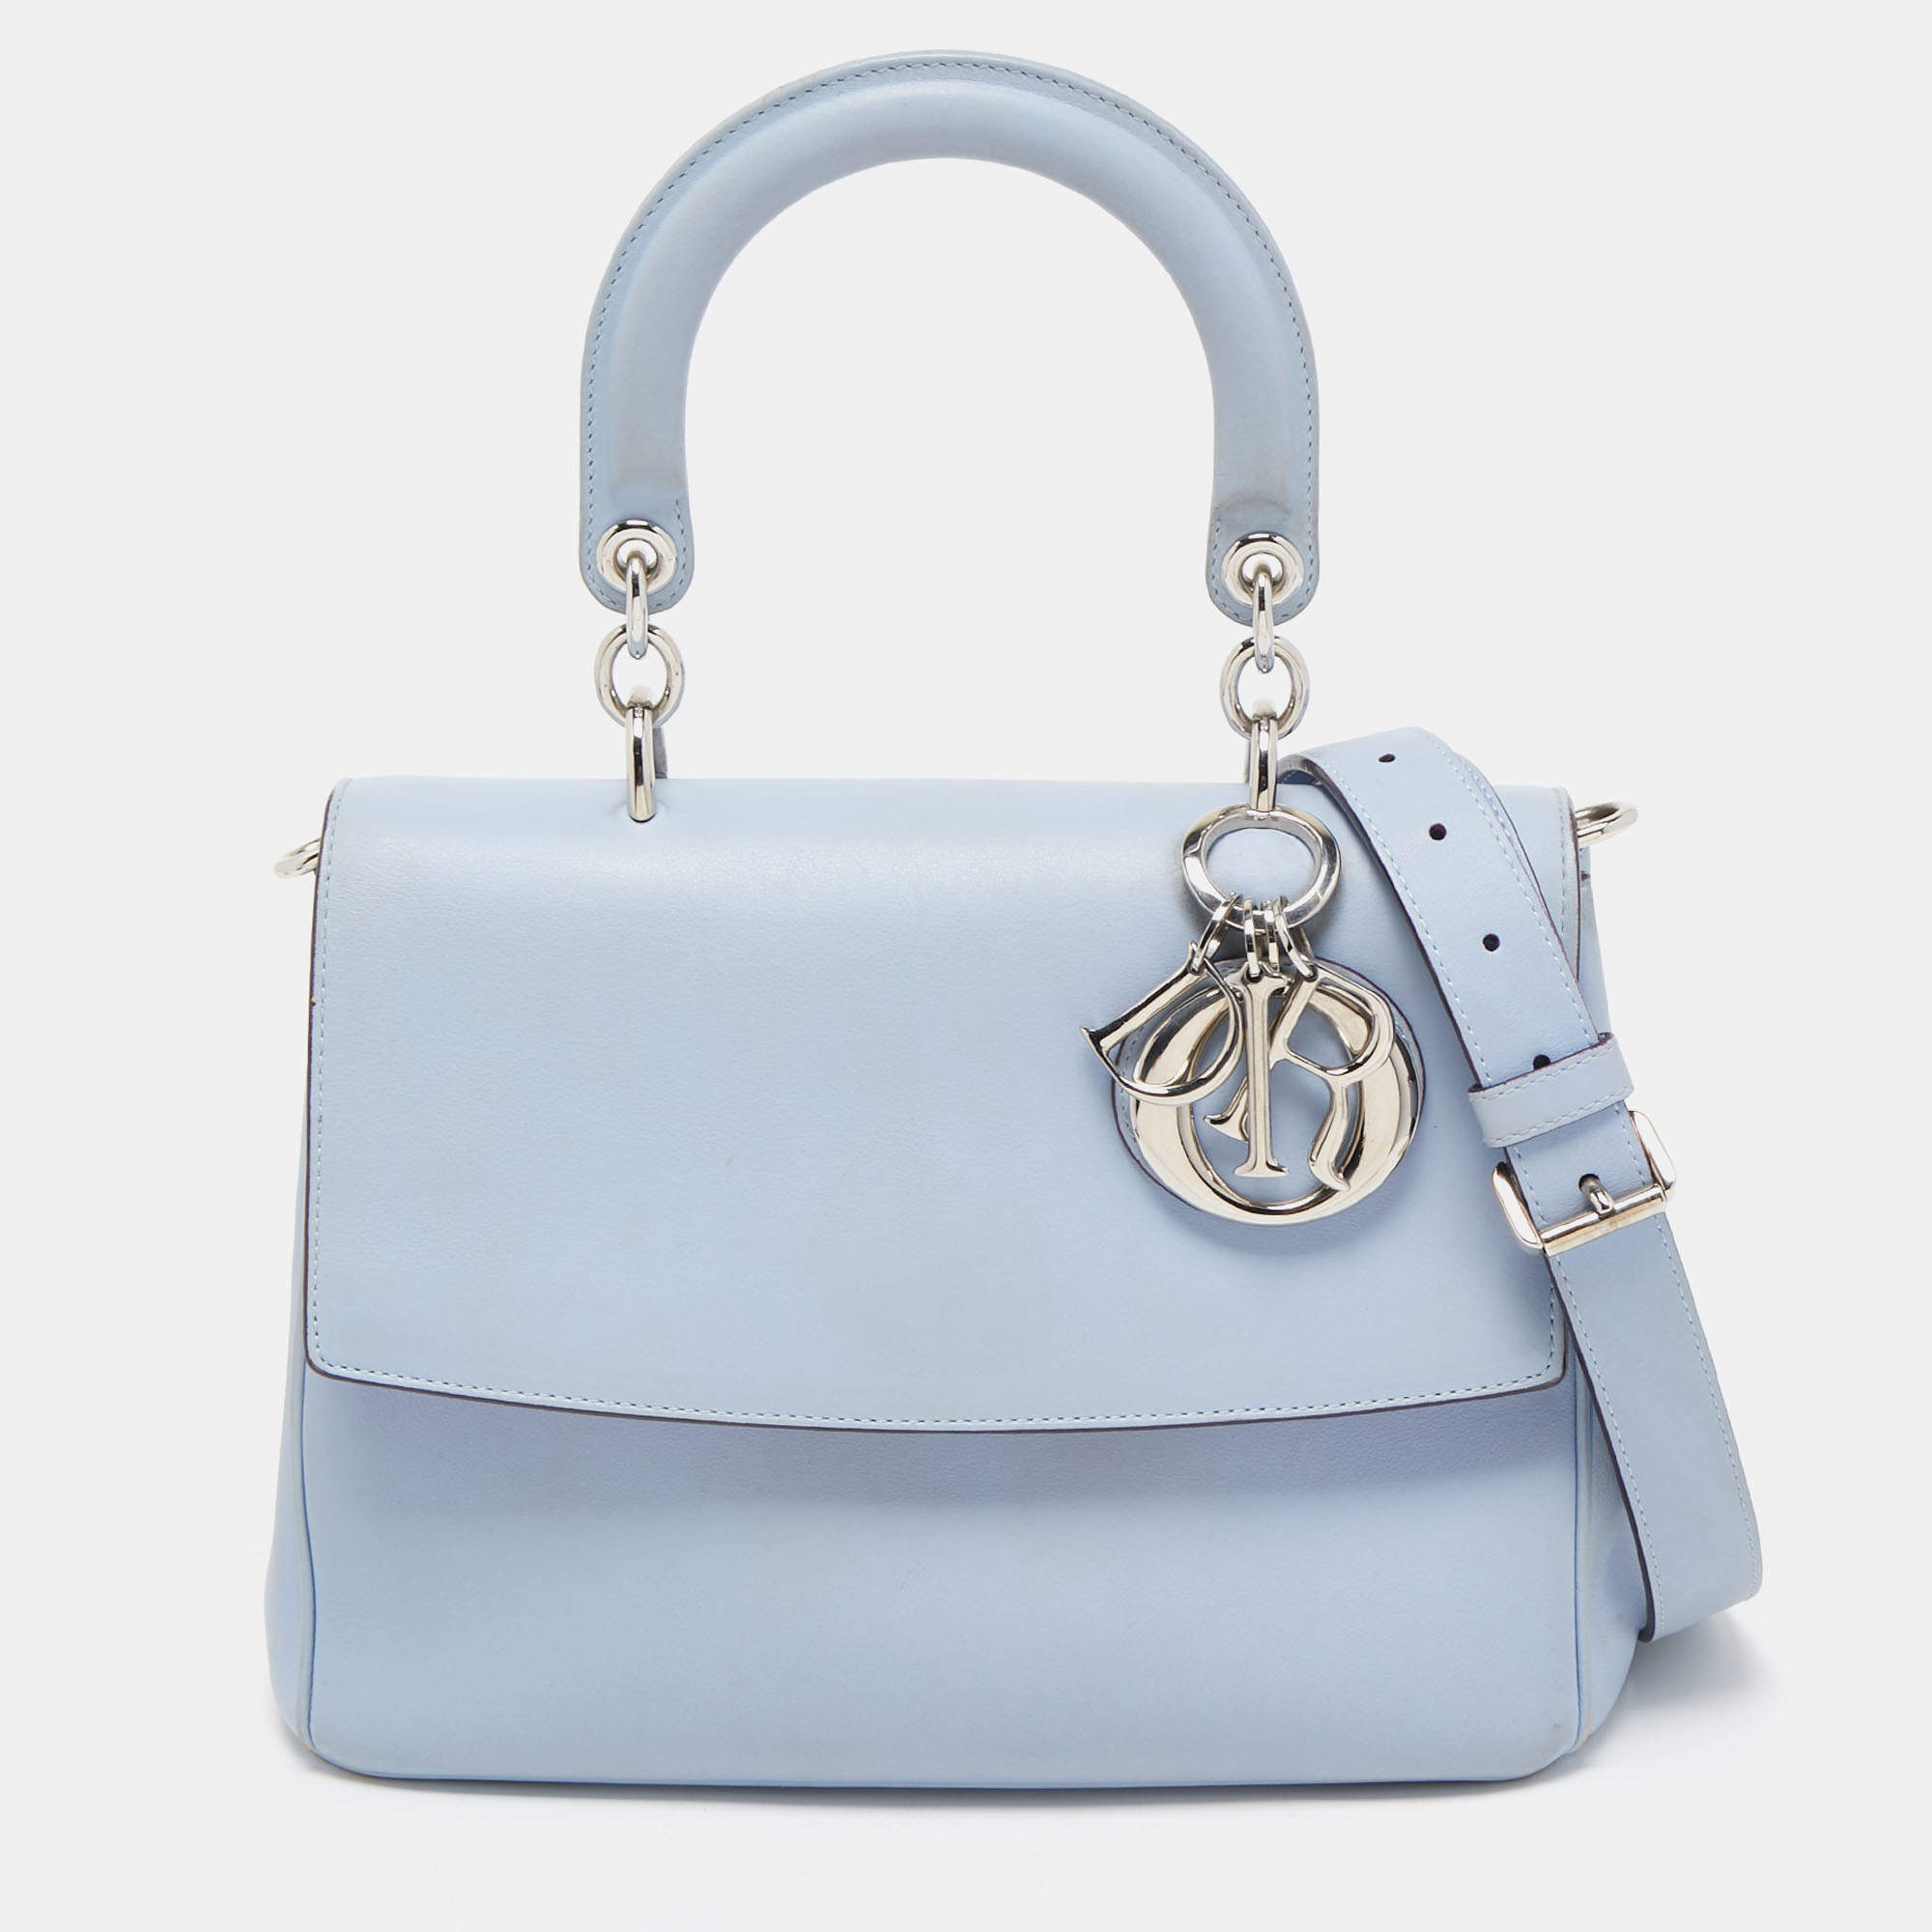 Georges MM bag in blue imprint leather